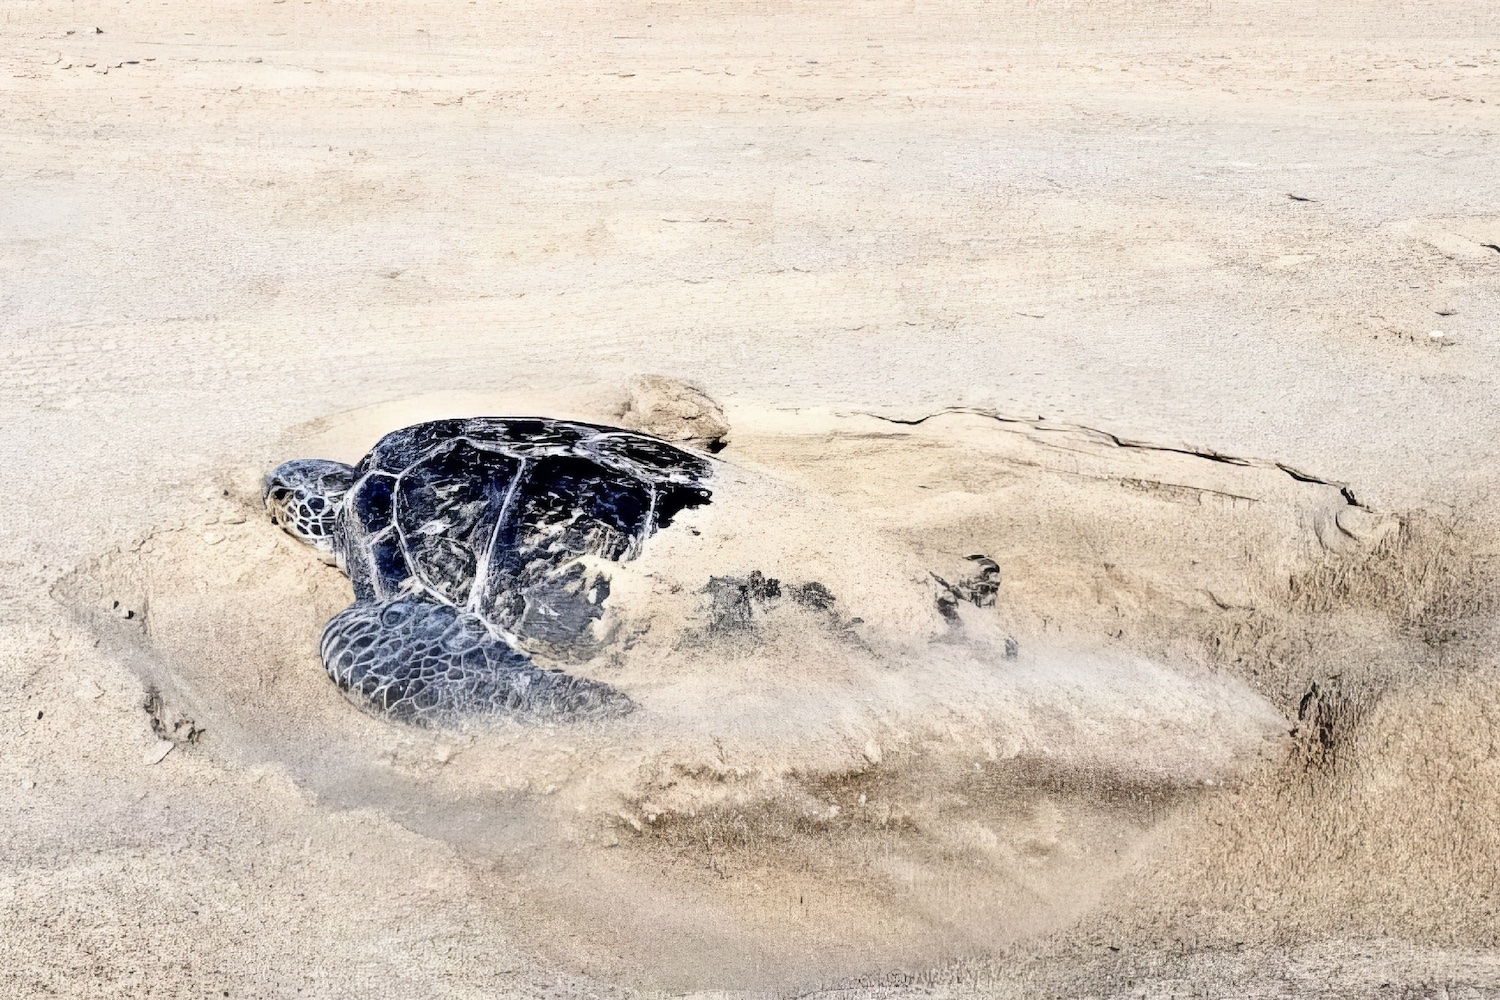 A green sea turtle partially buried in the sand.